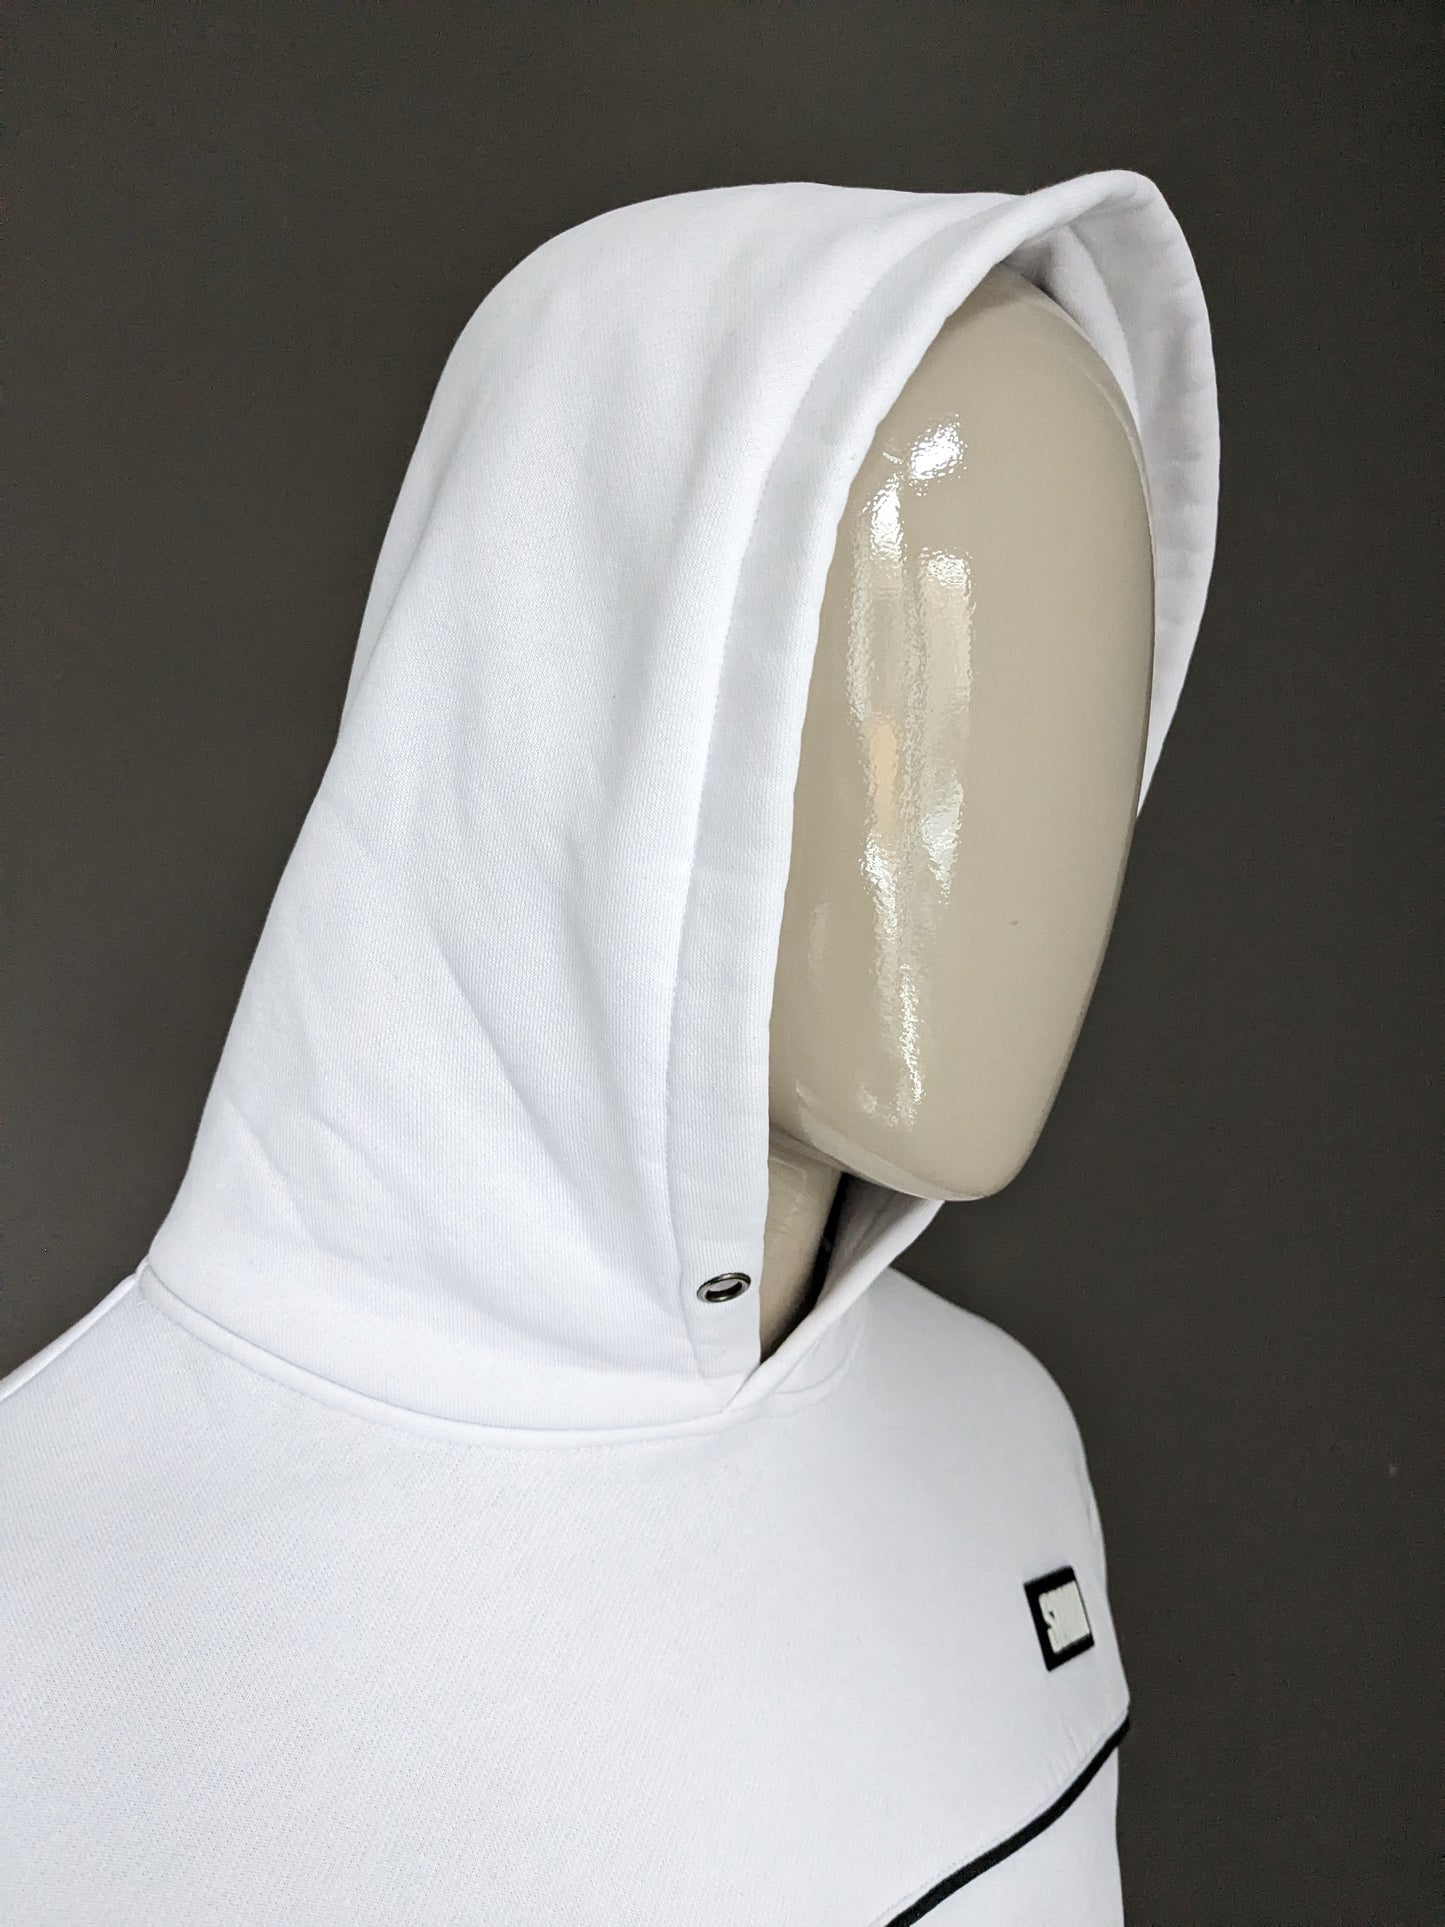 Sidemen Official Hoodie. White. Size S.